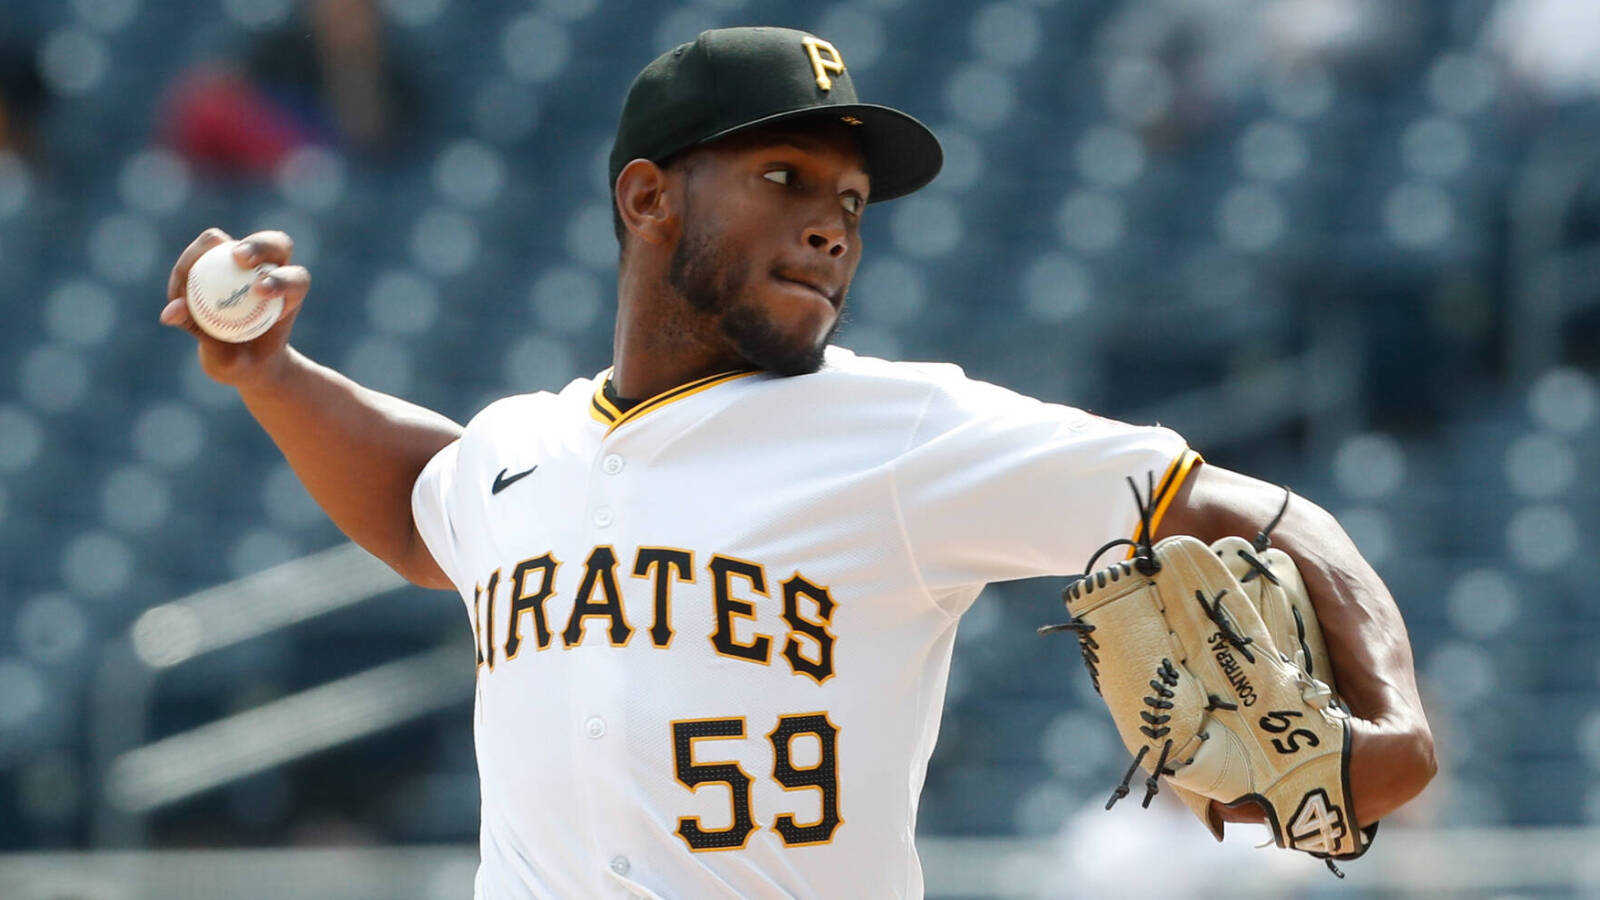 Pirates designate former top pitching prospect for assignment, place 3B on IL